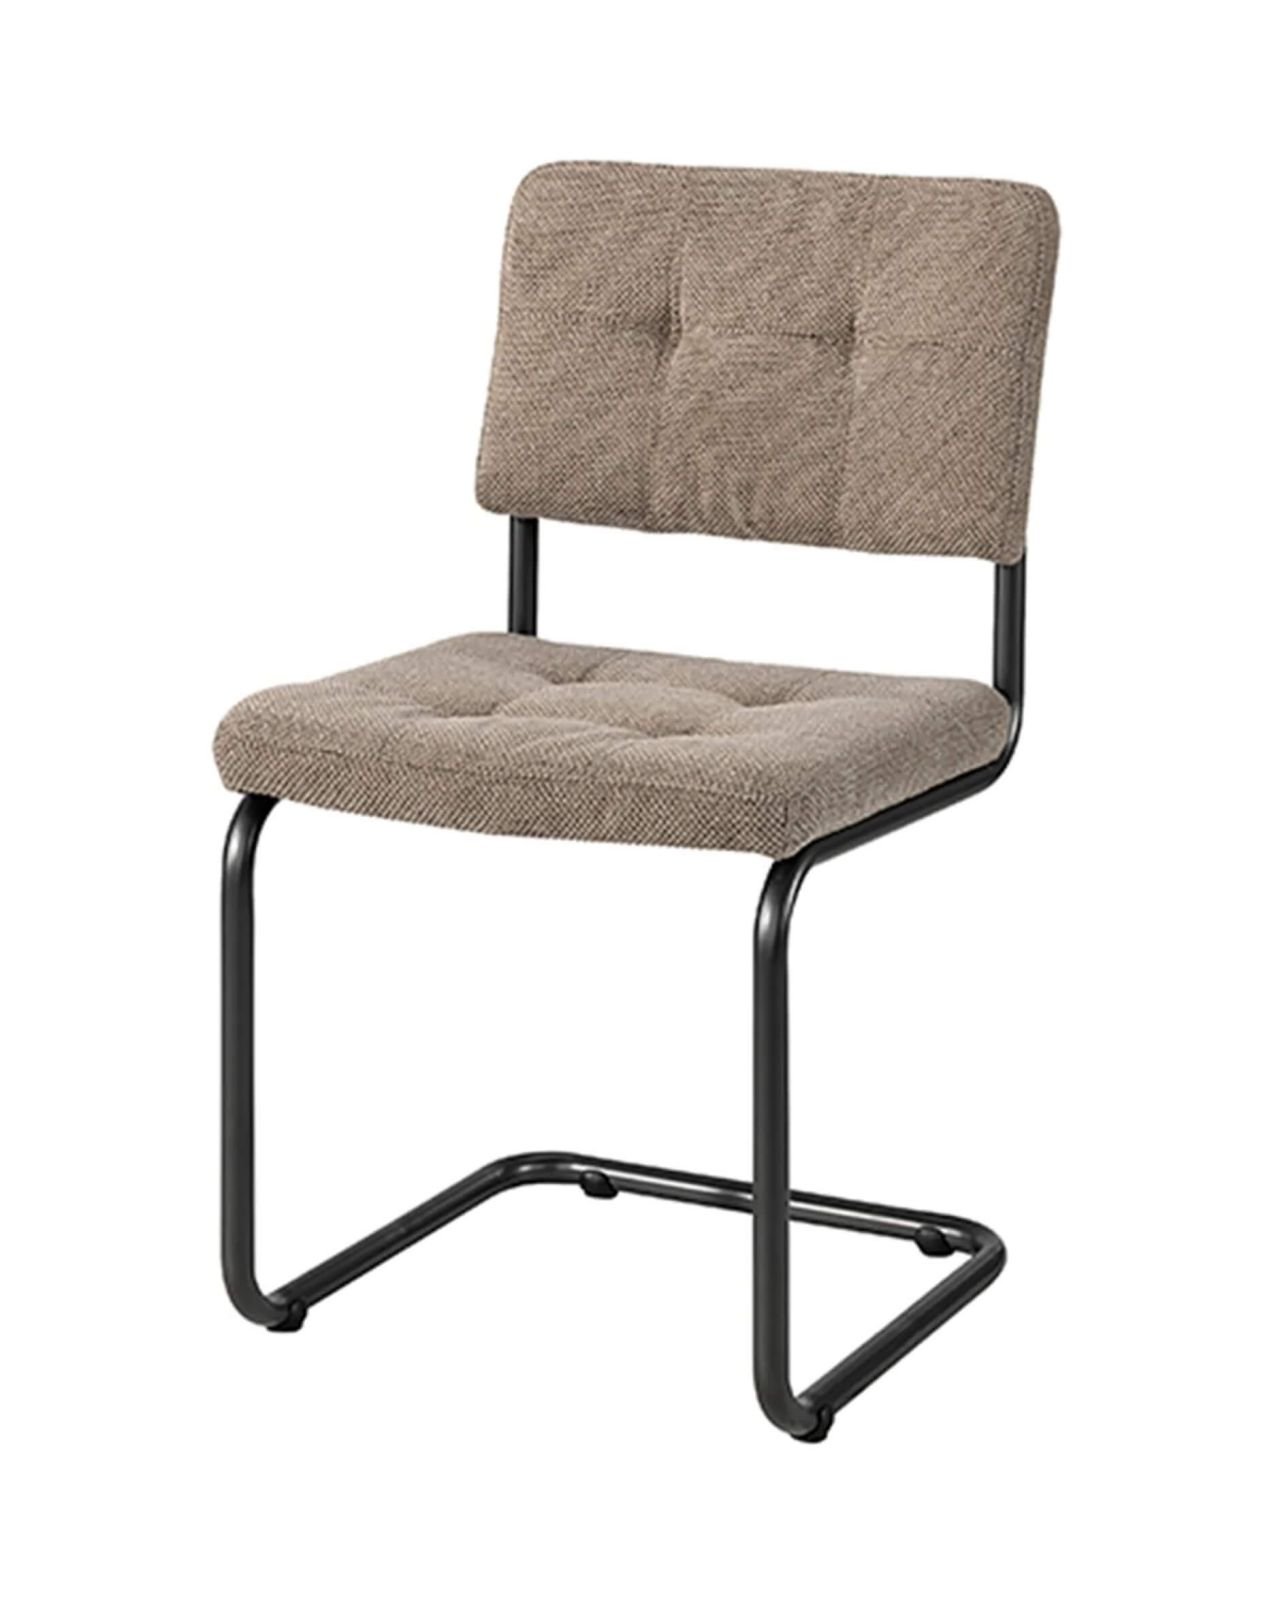 Carlos dining chair quiet liver